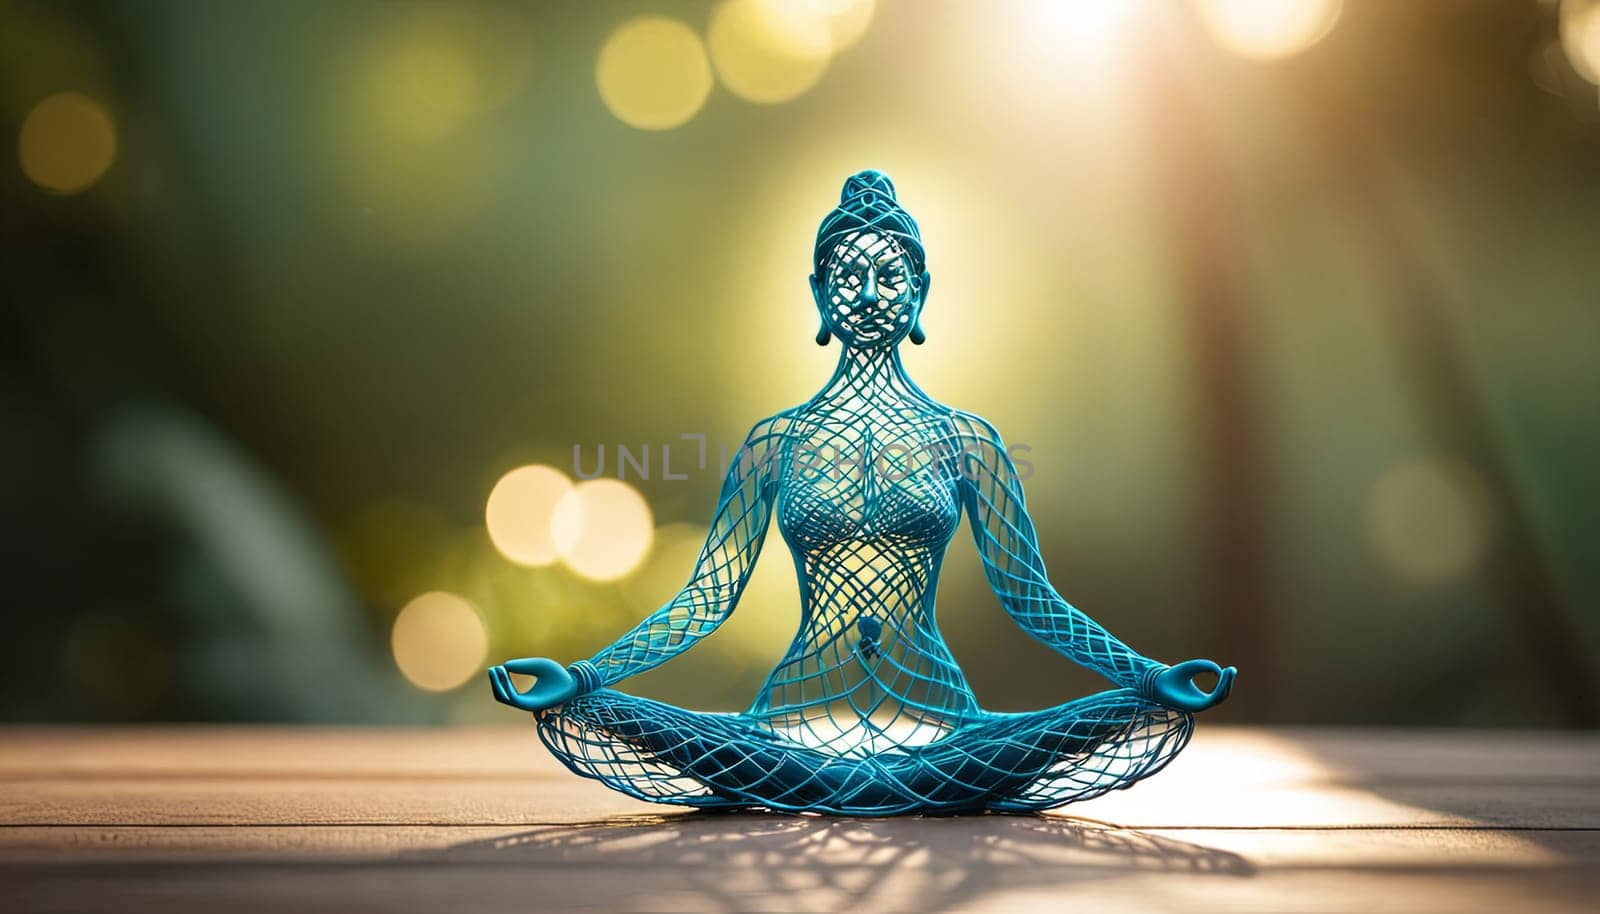 Woman in yoga pose, bent wire figure on nature backdrop, Creative figures symbol of yoga and harmony, art and serenity intersection. Female fitness yoga routine concept. Healthy lifestyle. by panophotograph